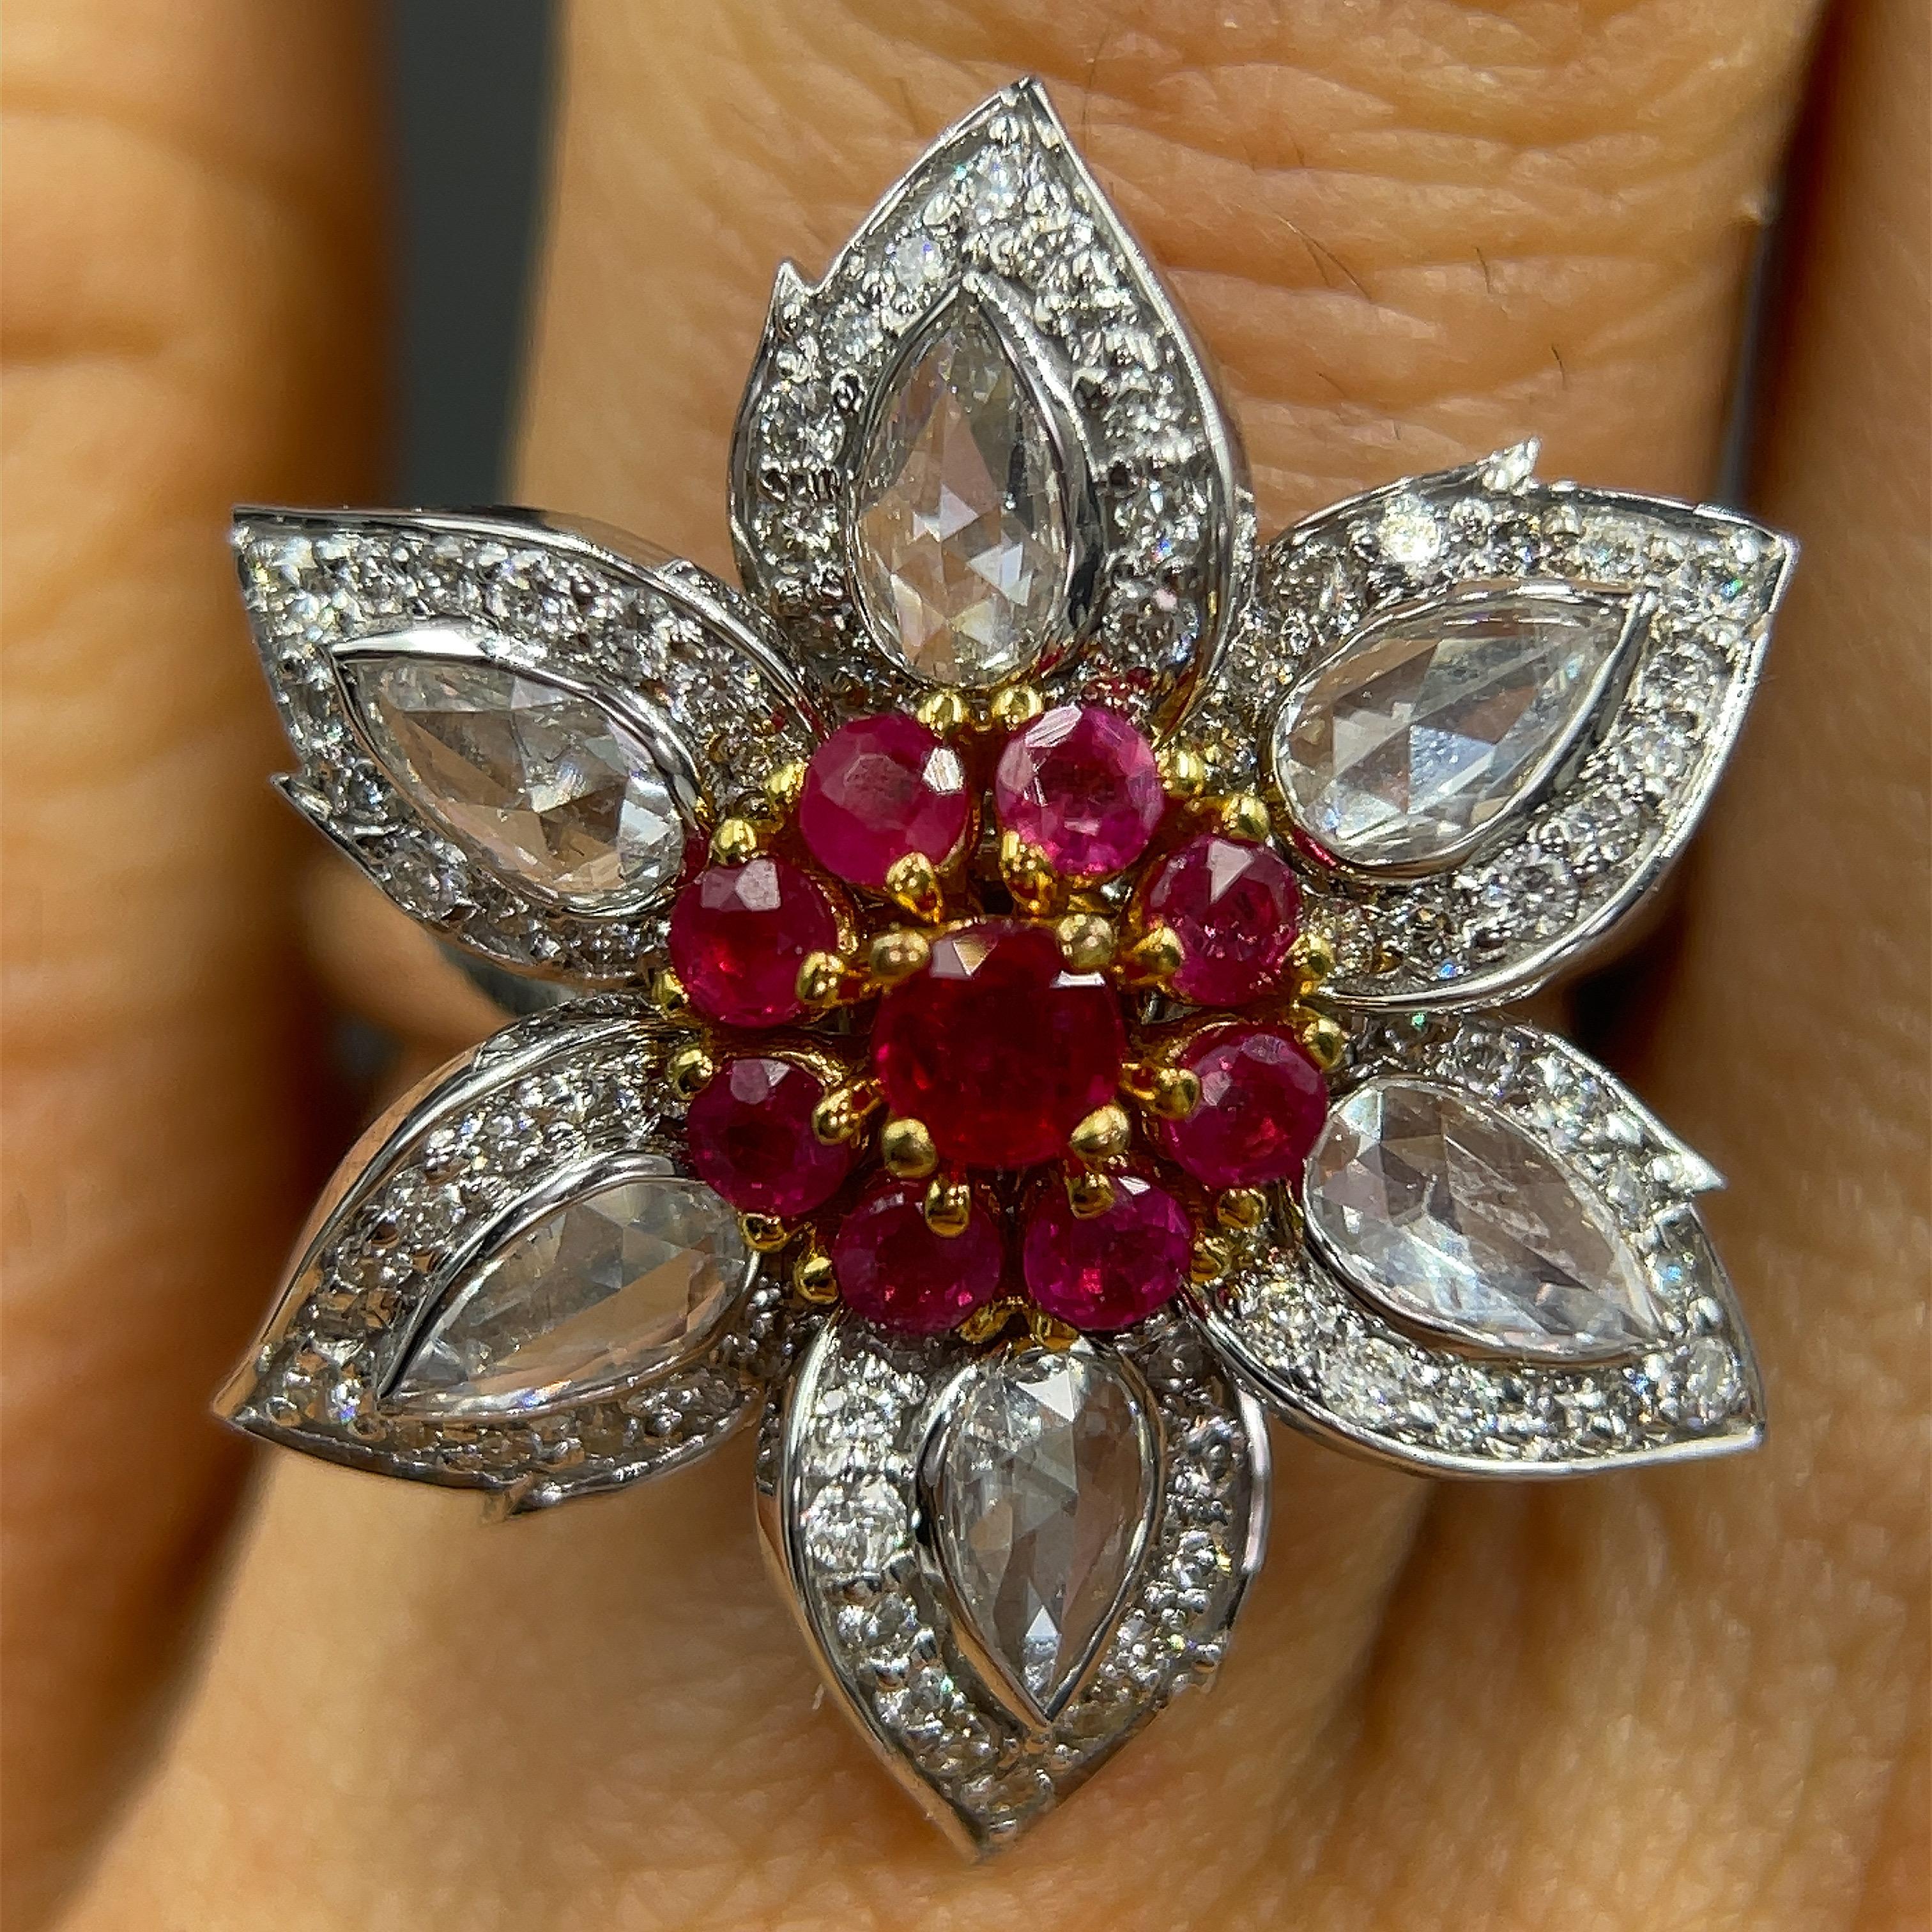 A life like rendition of the magnolia flower, this ring features 0.71 carats of natural Burmese rubies flanked by rose cut diamonds.
Round Brilliant & Rosecut Diamonds
Shape	Rose cut
Color	F
Clarity	VVS
Weight	0.71 carats
Additional Diamonds